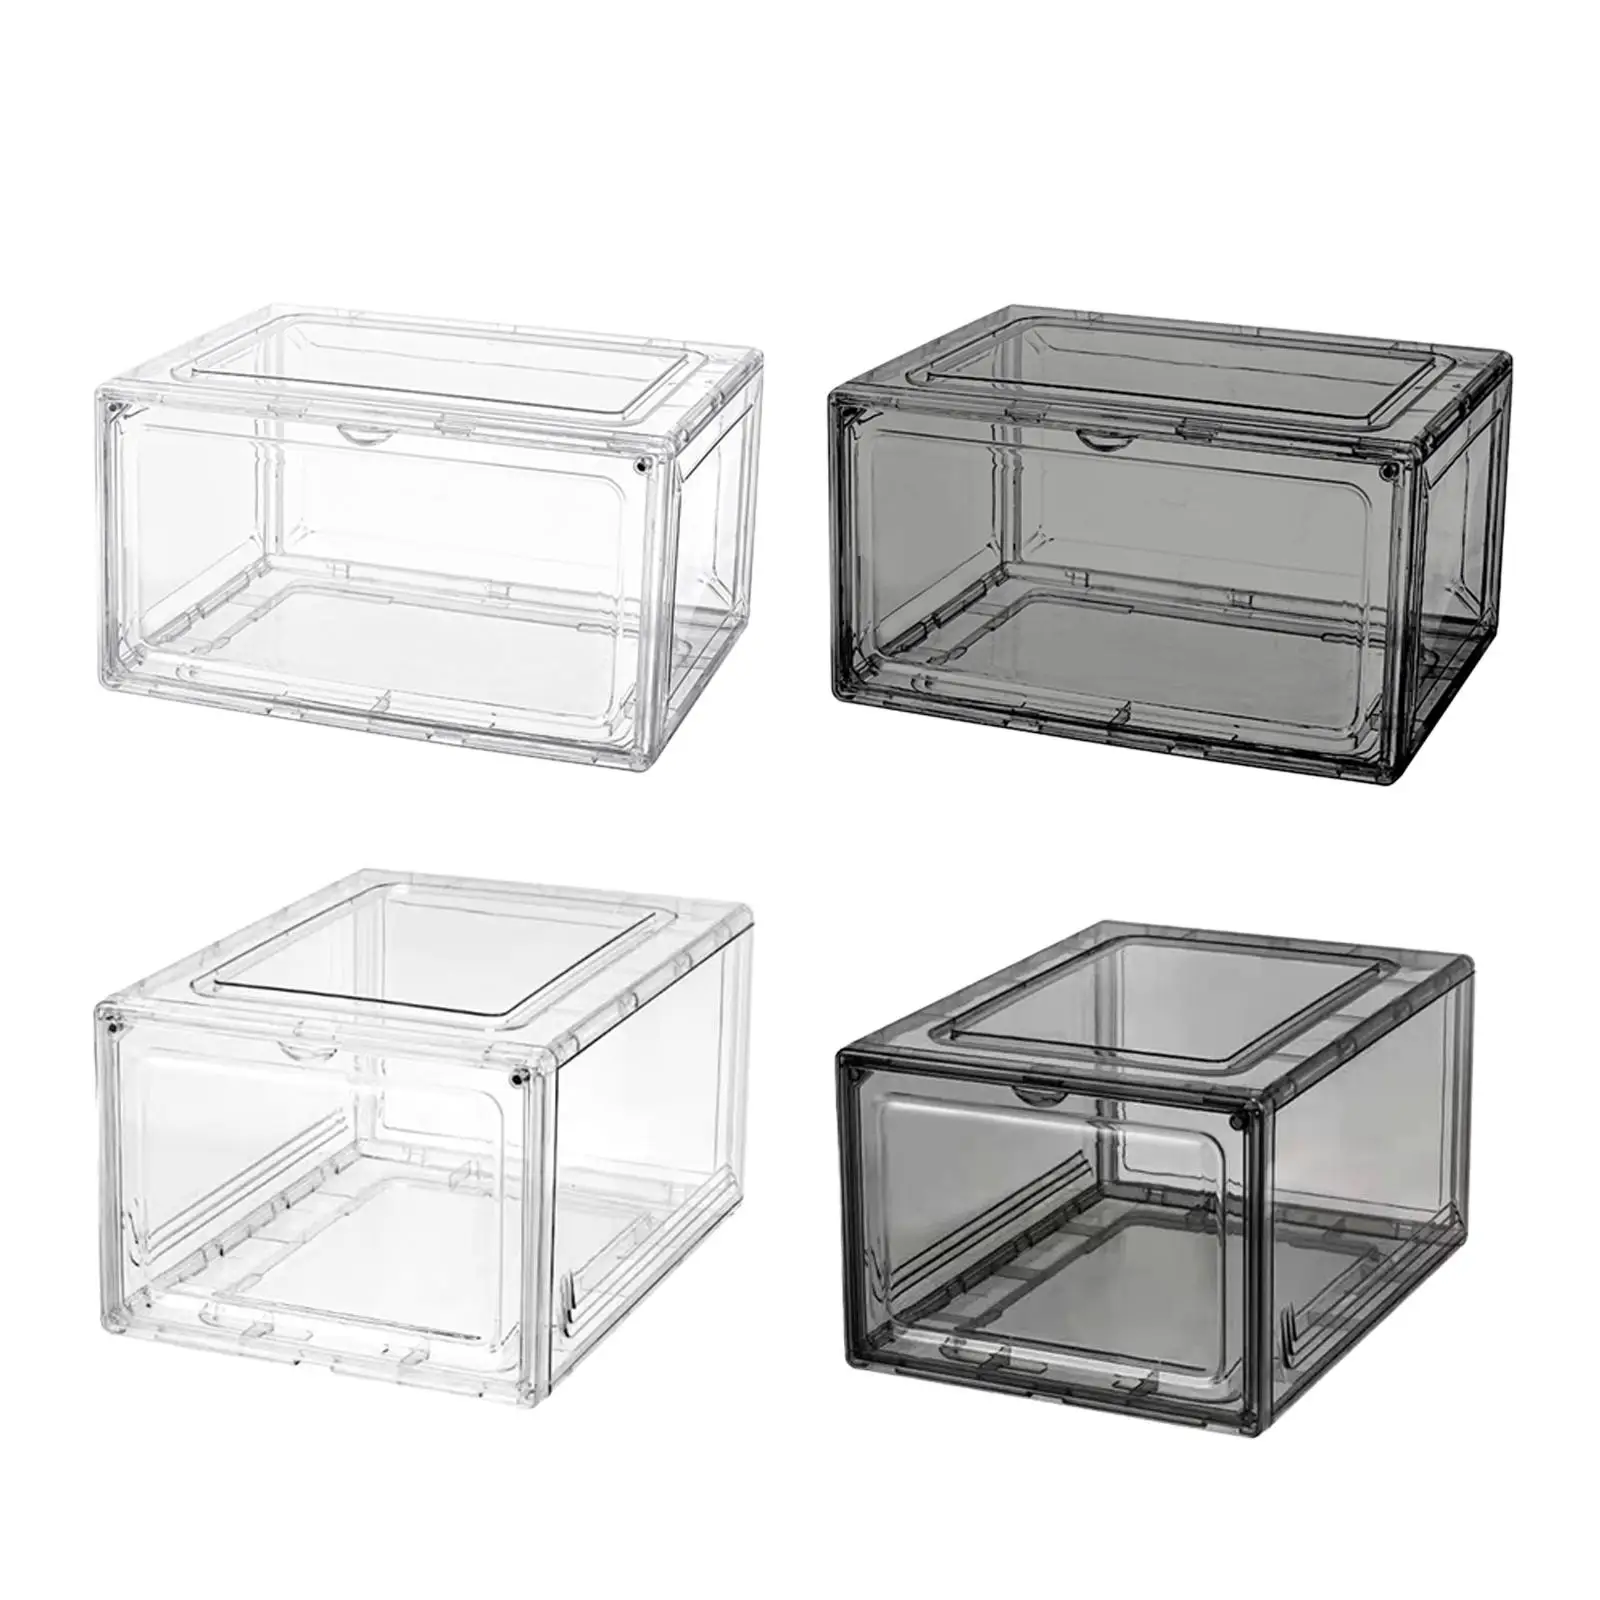 Transparent Display Shoe Box Foldable Space Saving Drawers Holders Shoe Sneaker Containers Bins Boot & Shoe Storage Boxes